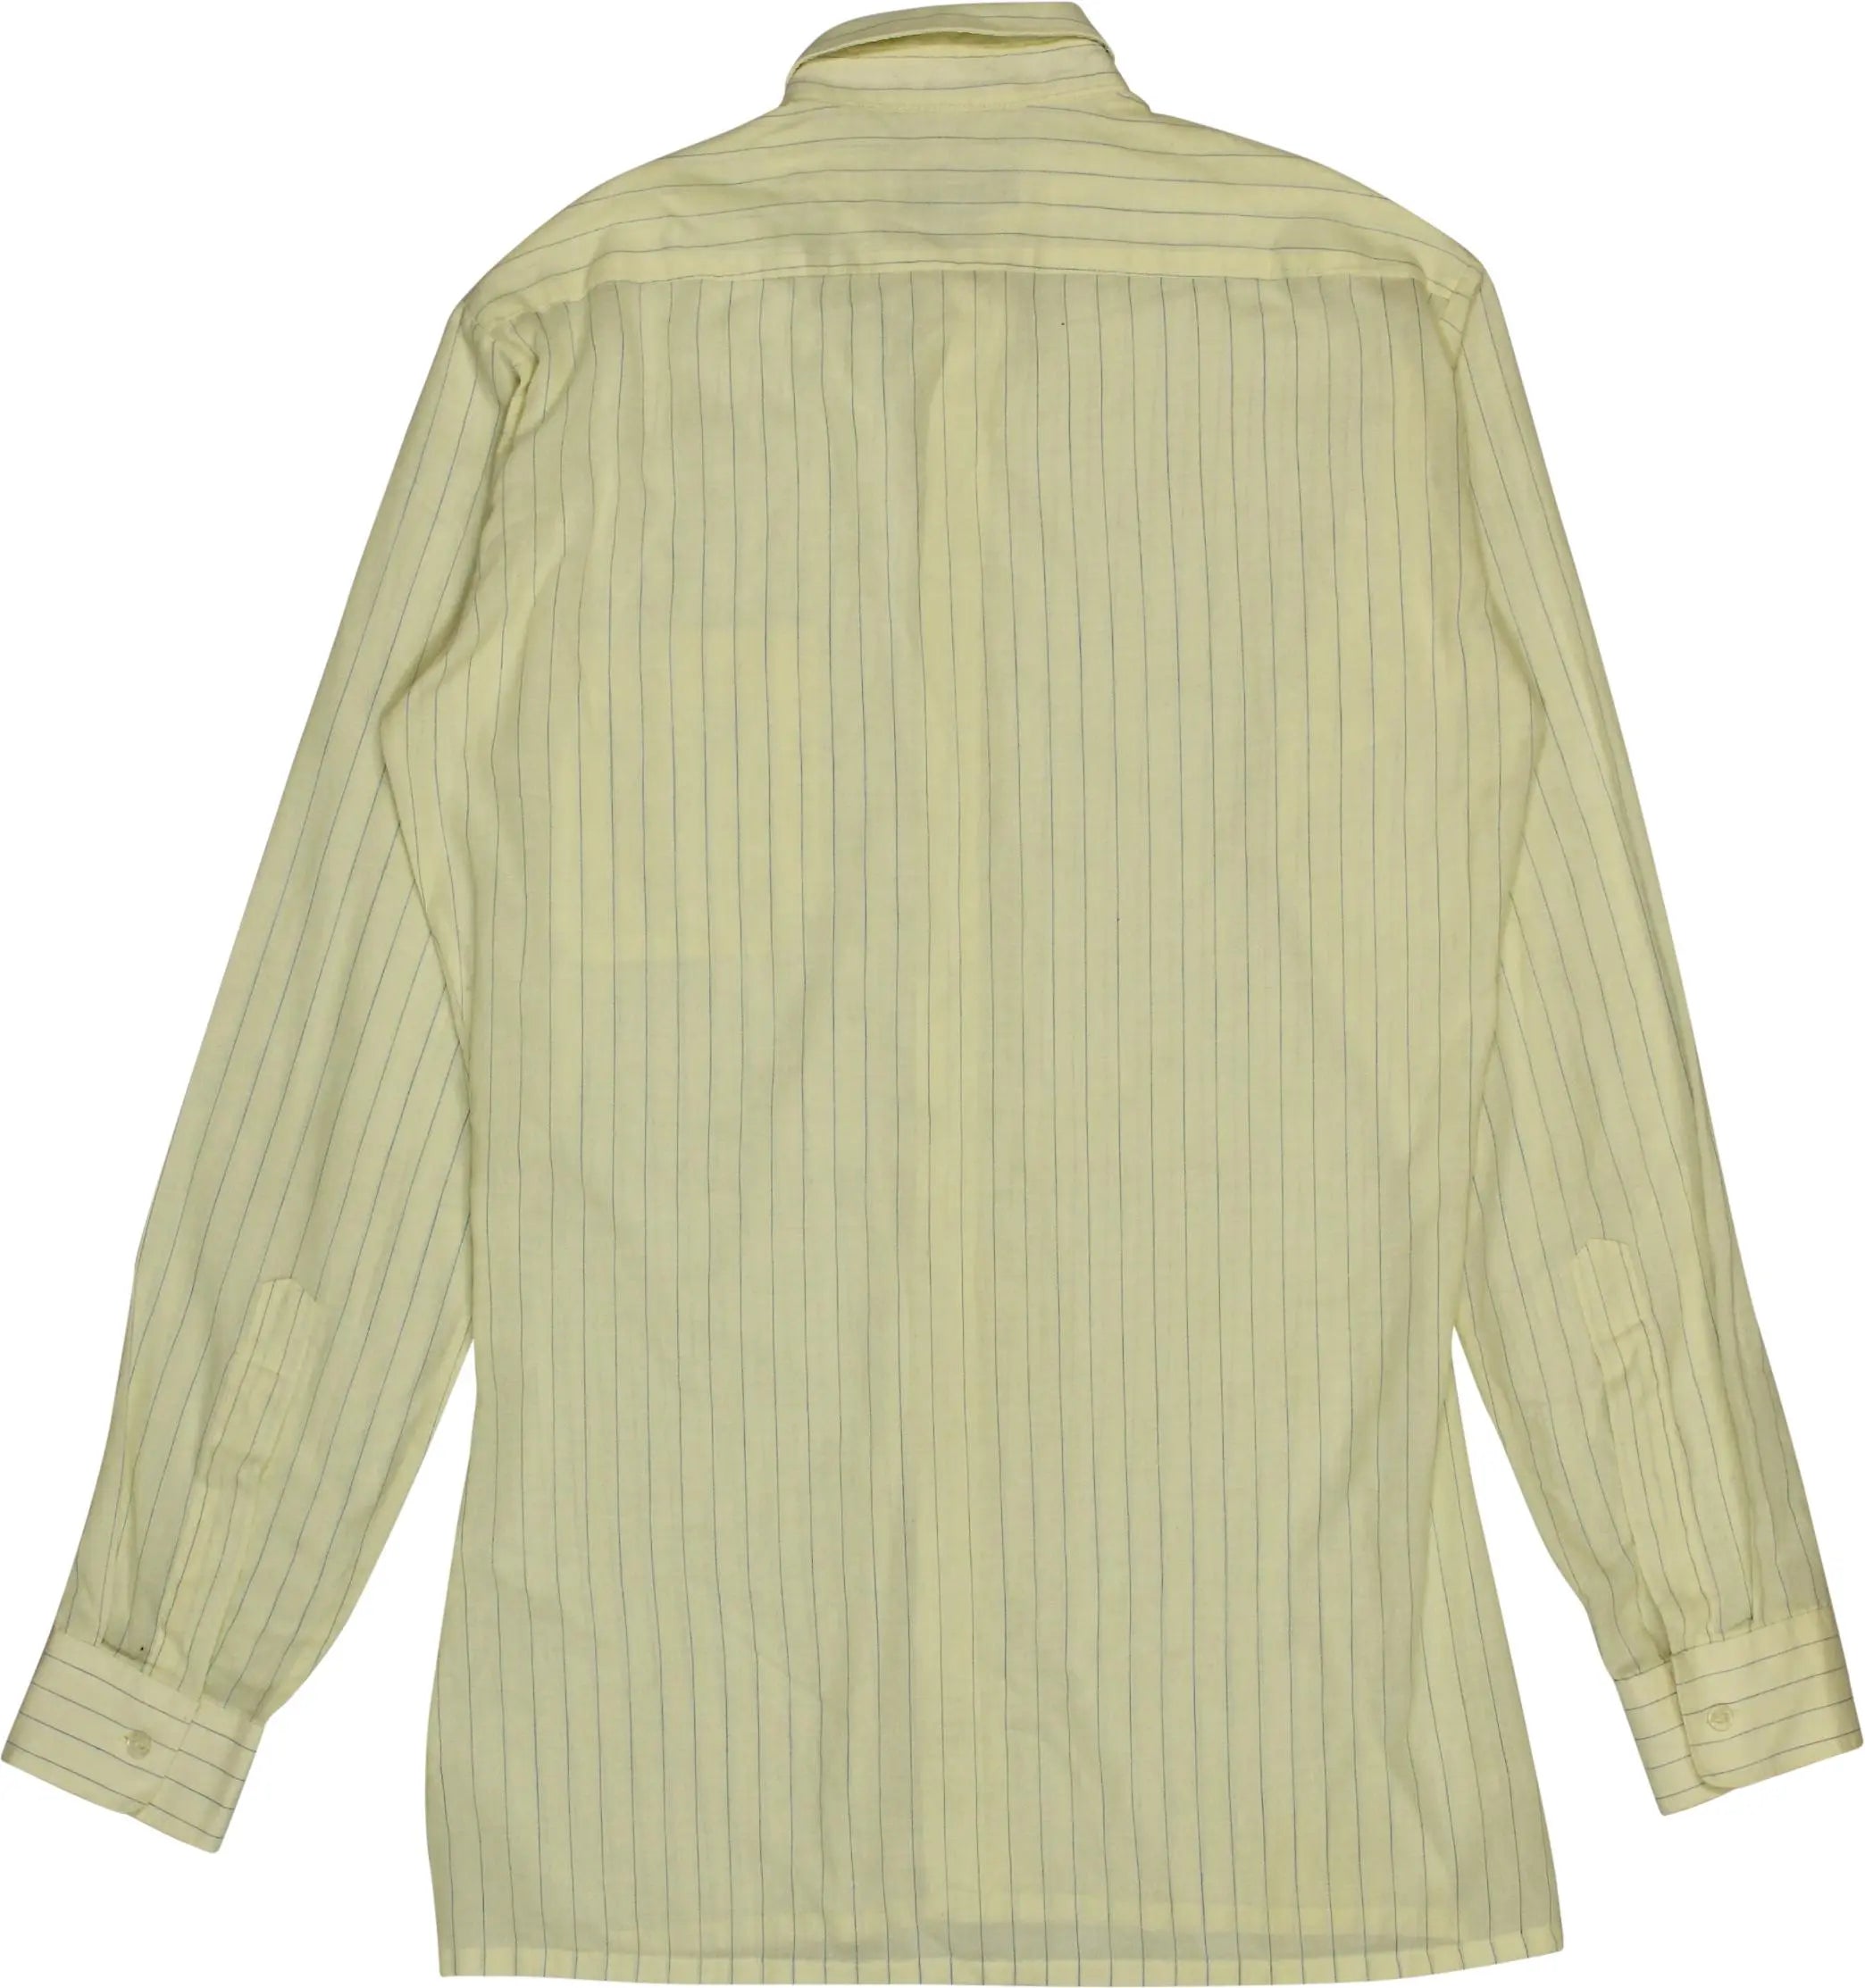 C&A - Yellow Striped Shirt by C&A- ThriftTale.com - Vintage and second handclothing